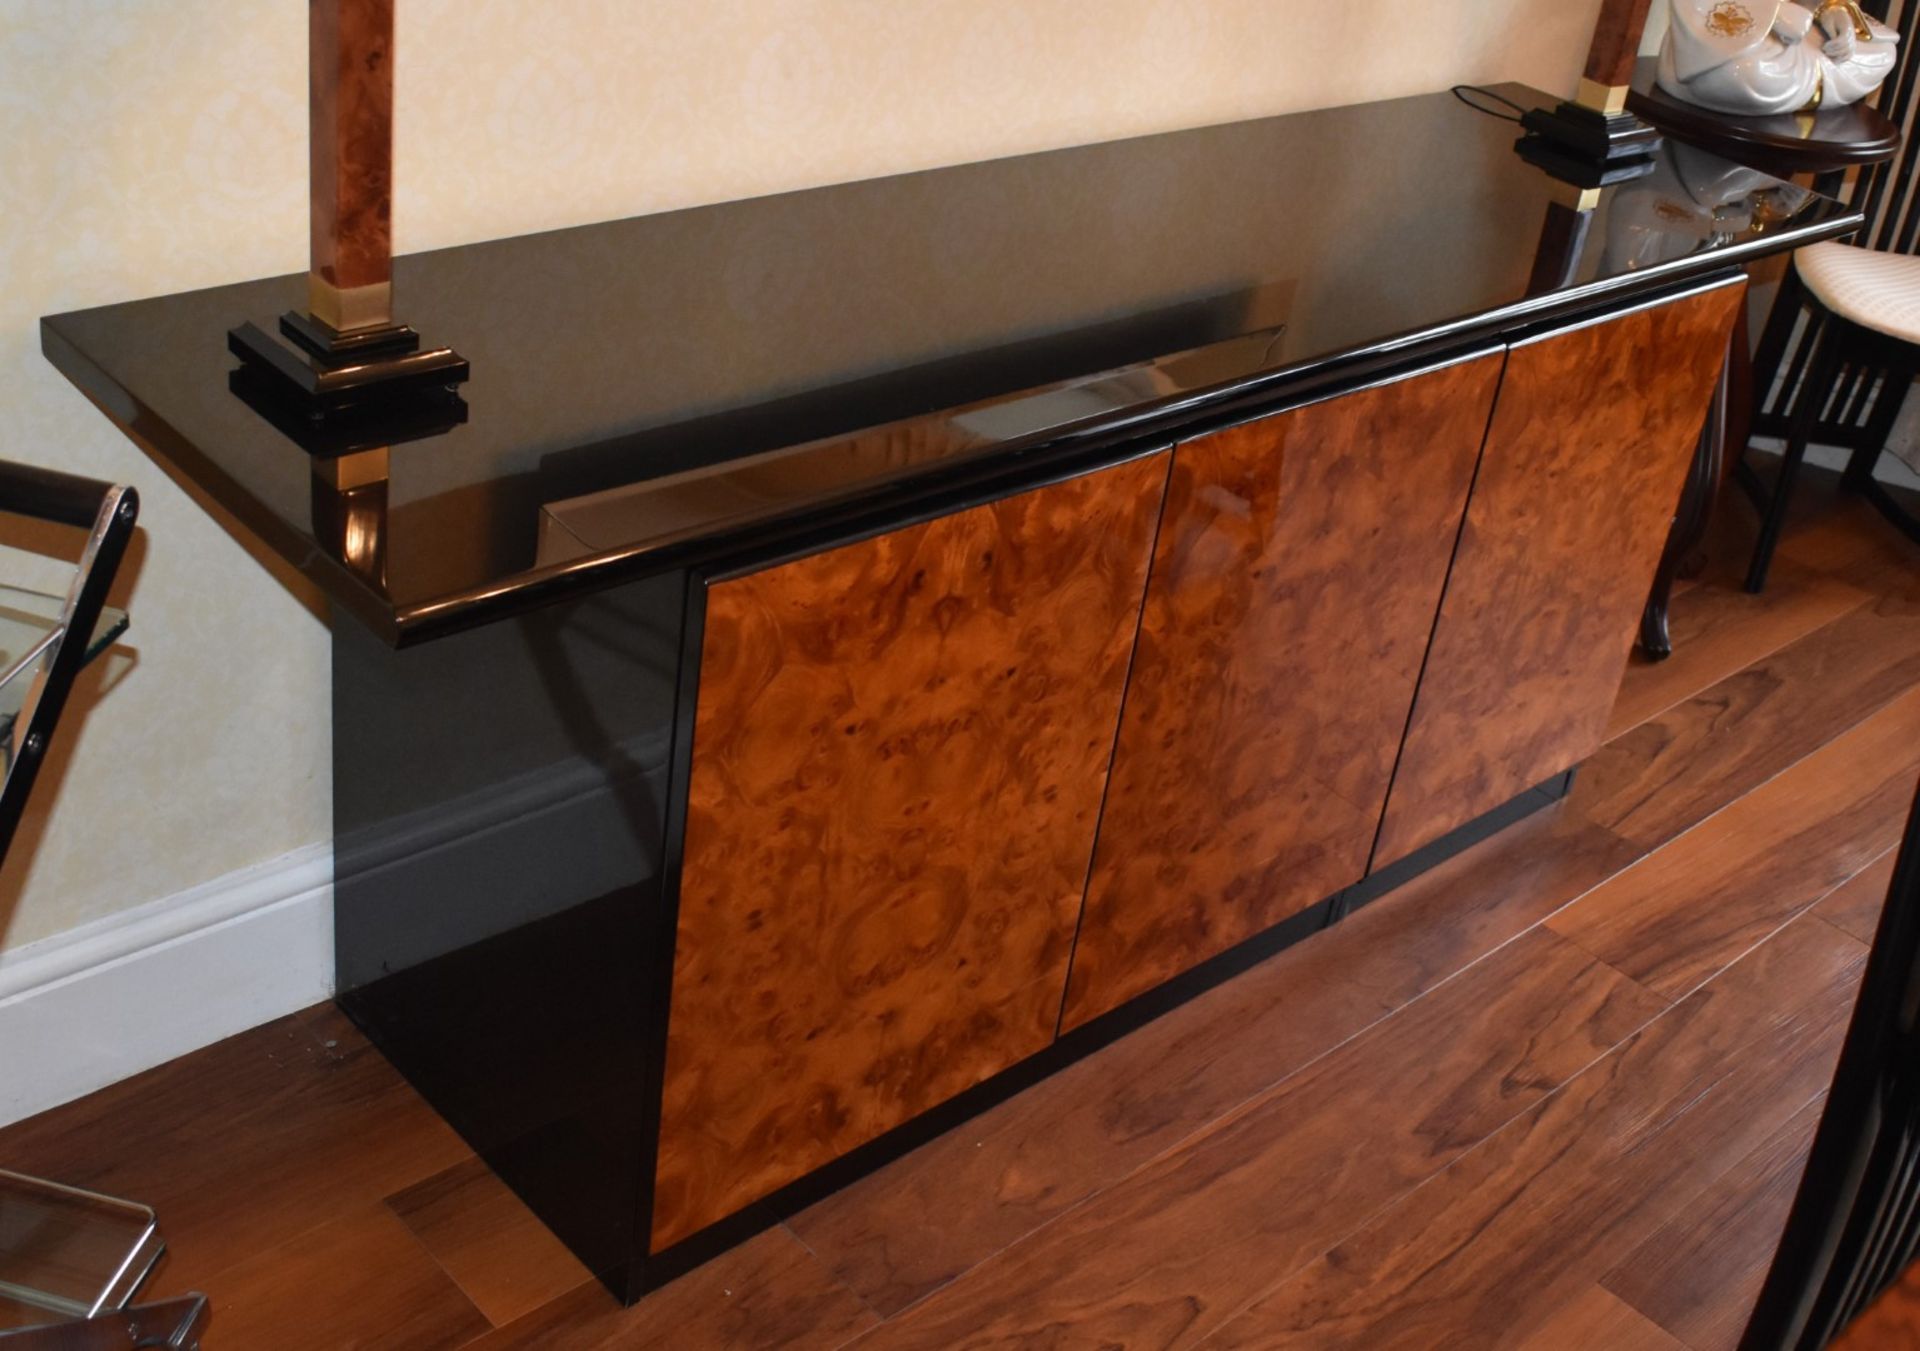 1 x Contemporary Three Door Sideboard With Dark Gloss Finish and Burr Walnut Doors - Dimensions - Image 4 of 10